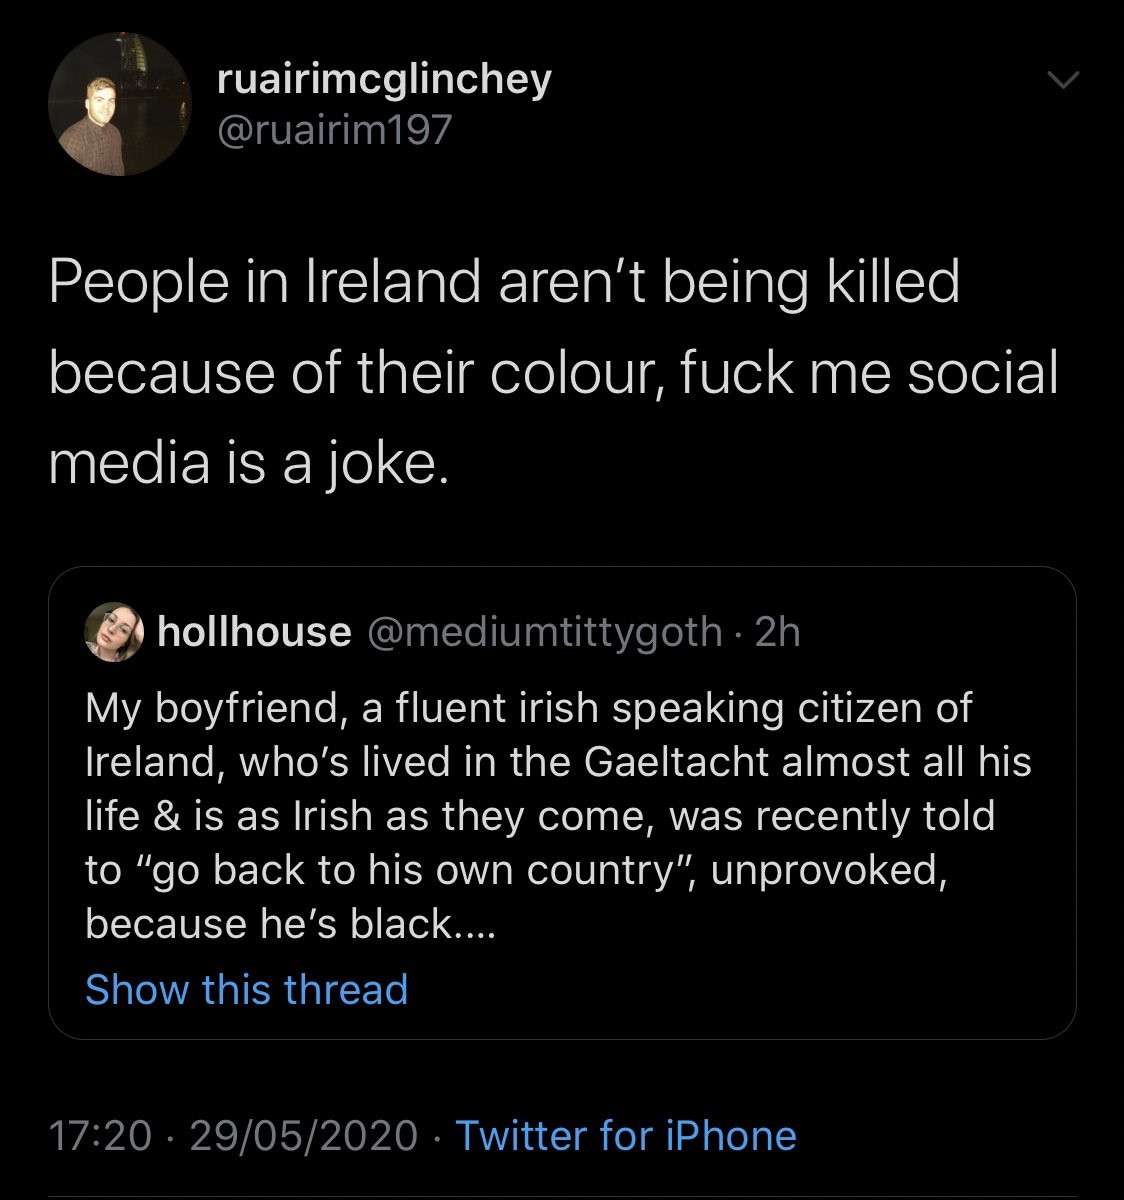 If you feel the same as Ruairi here, do me the favour of blocking me so I don’t have to bother. Just because POC aren’t being regularly murdered by police doesn’t mean racism doesn’t exist here. This sentiment is ignorant and comes from a place of complete uneducated privilege.